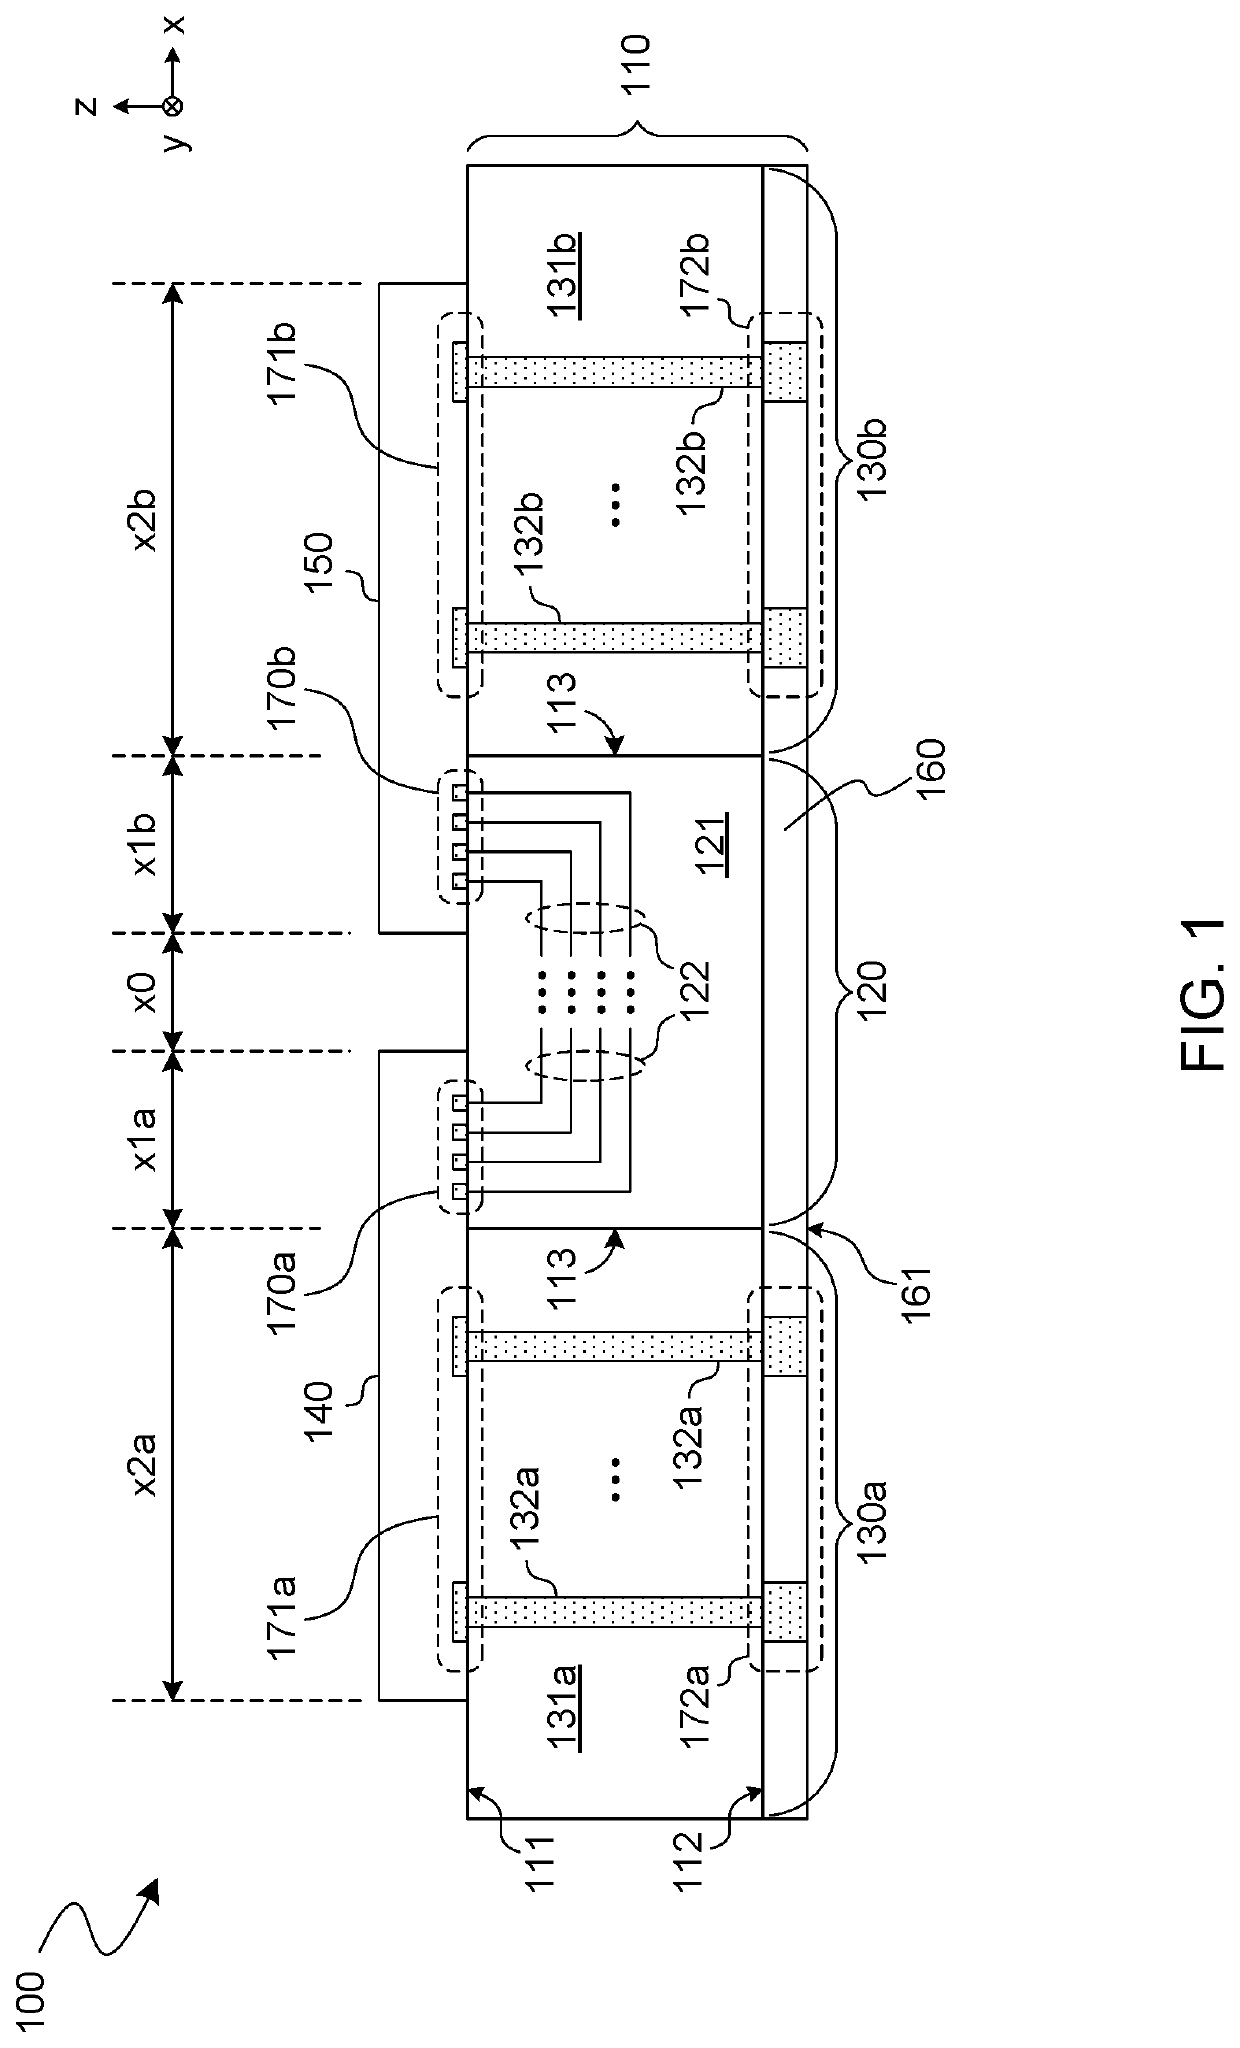 Composite interposer structure and method of providing same